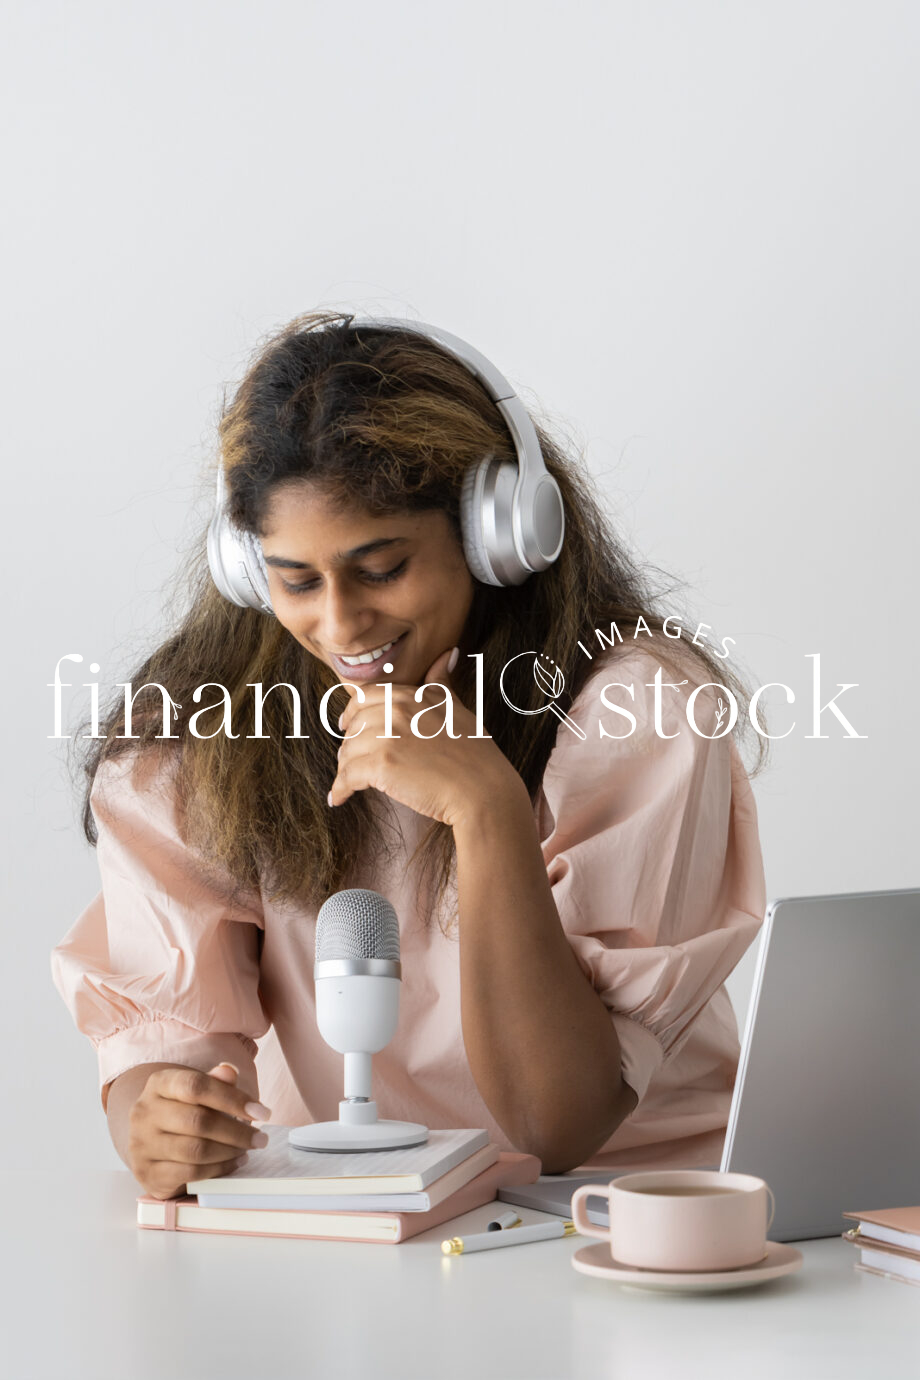 Financial Stock Images - Home finances-running small home business